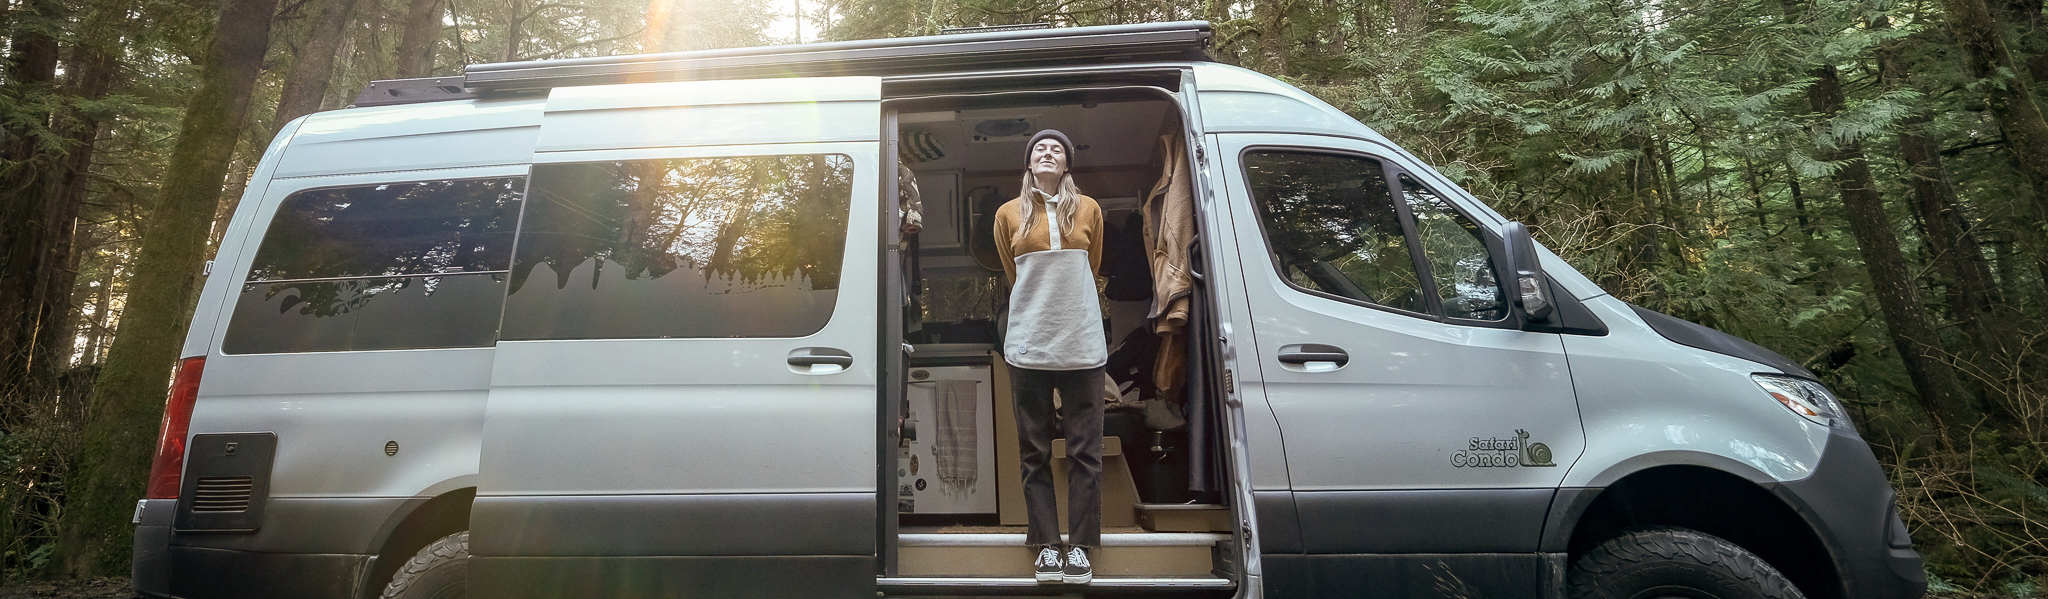 Sustainability in Vanlife: How can we be more eco-friendly on the road?